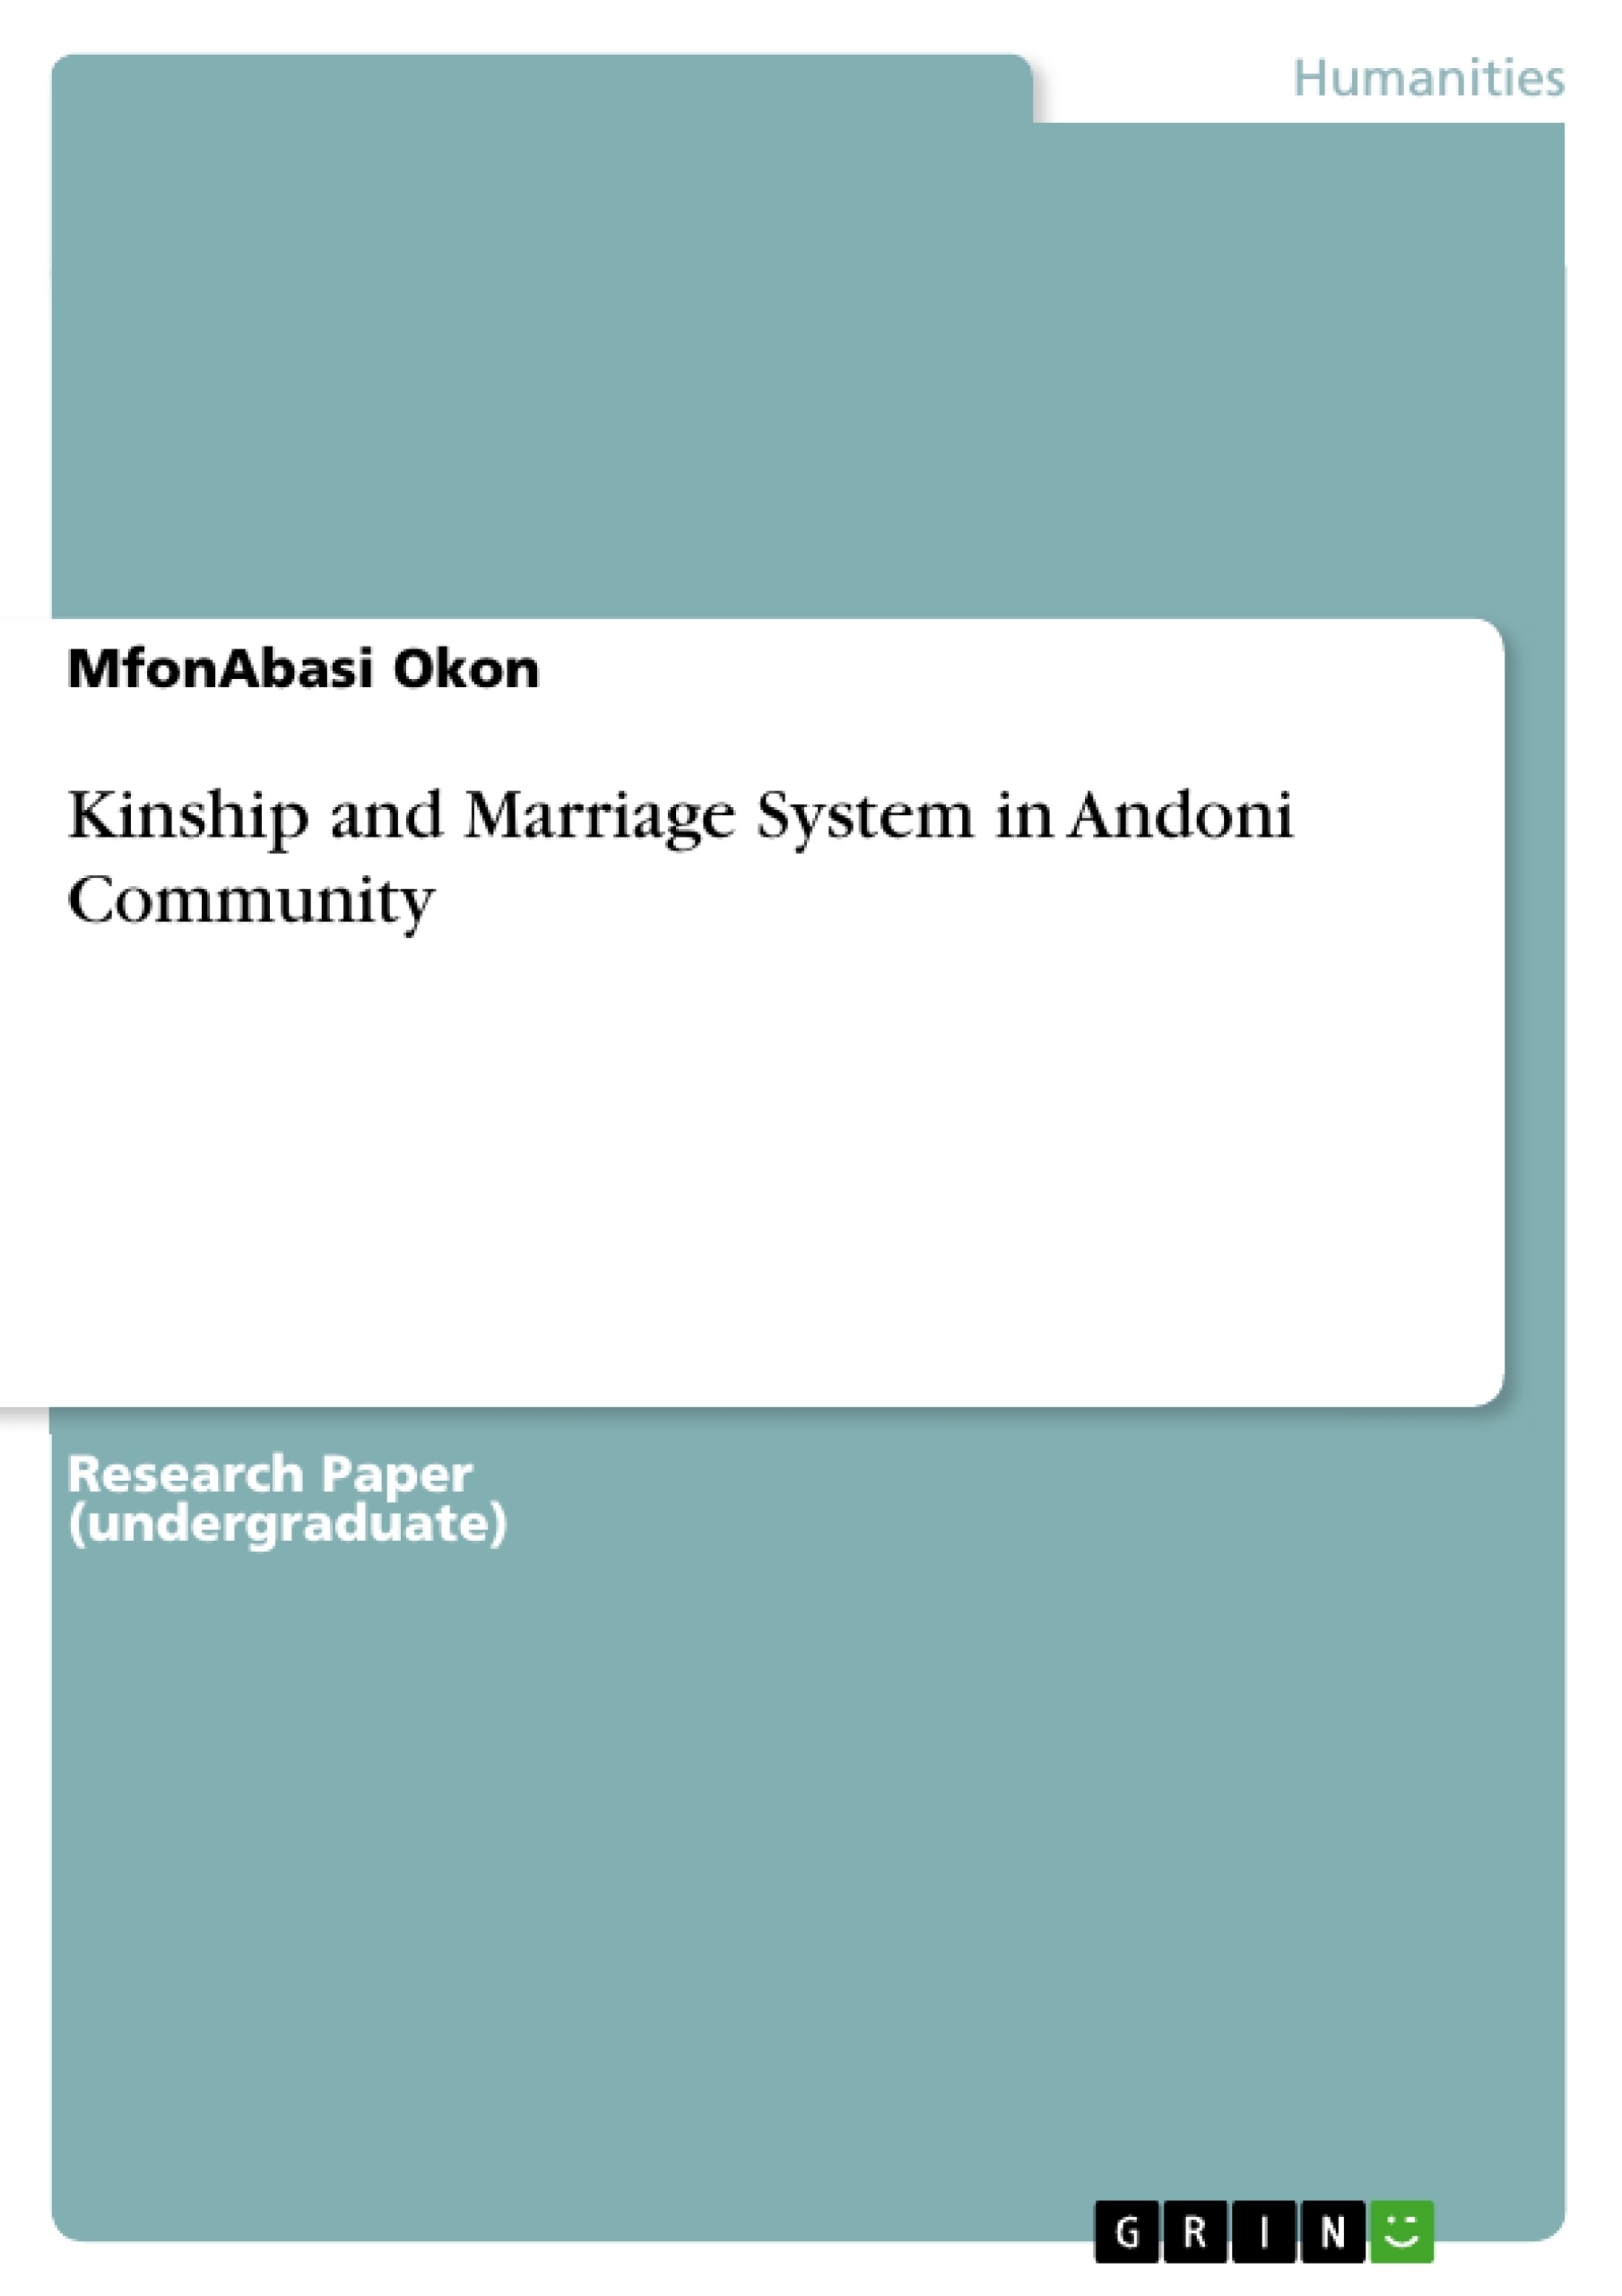 Title: Kinship and Marriage System in Andoni Community